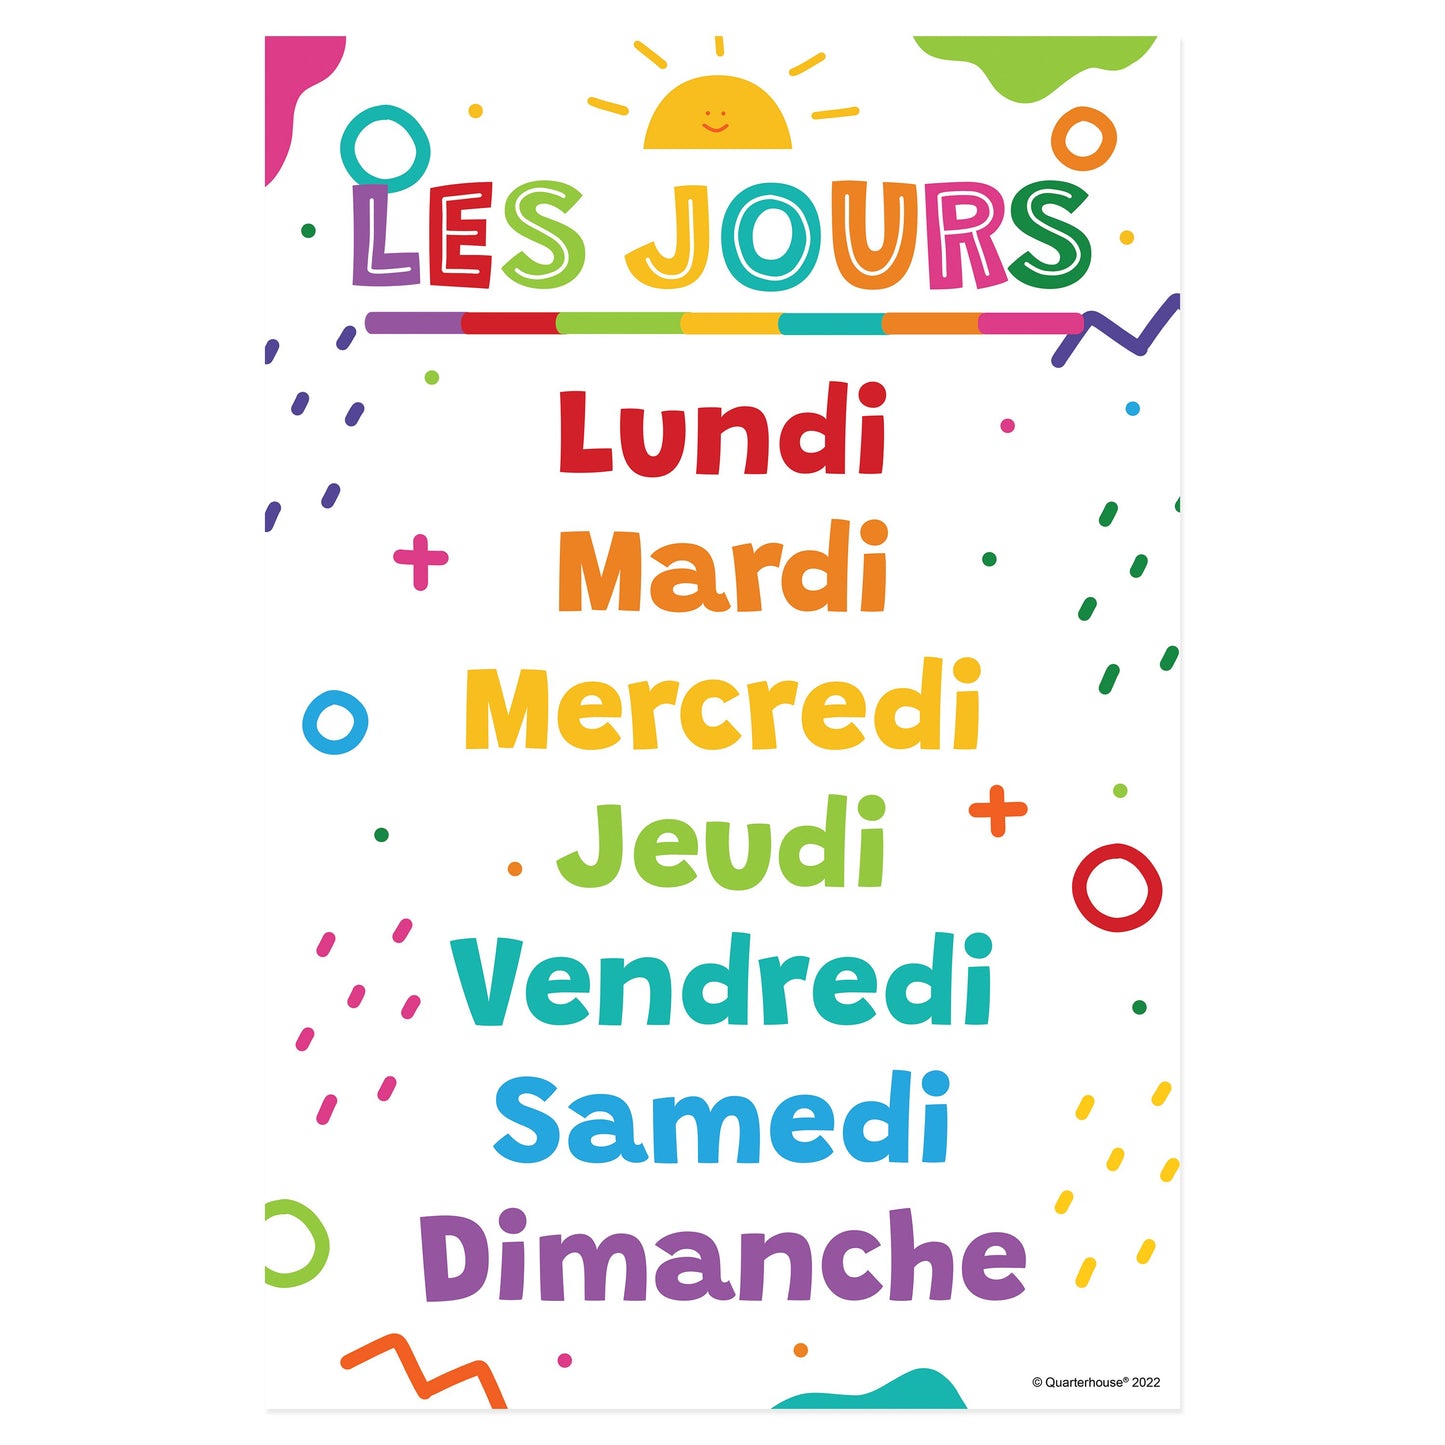 Quarterhouse Beginner French - Days of the Week Poster, French and ESL Classroom Materials for Teachers